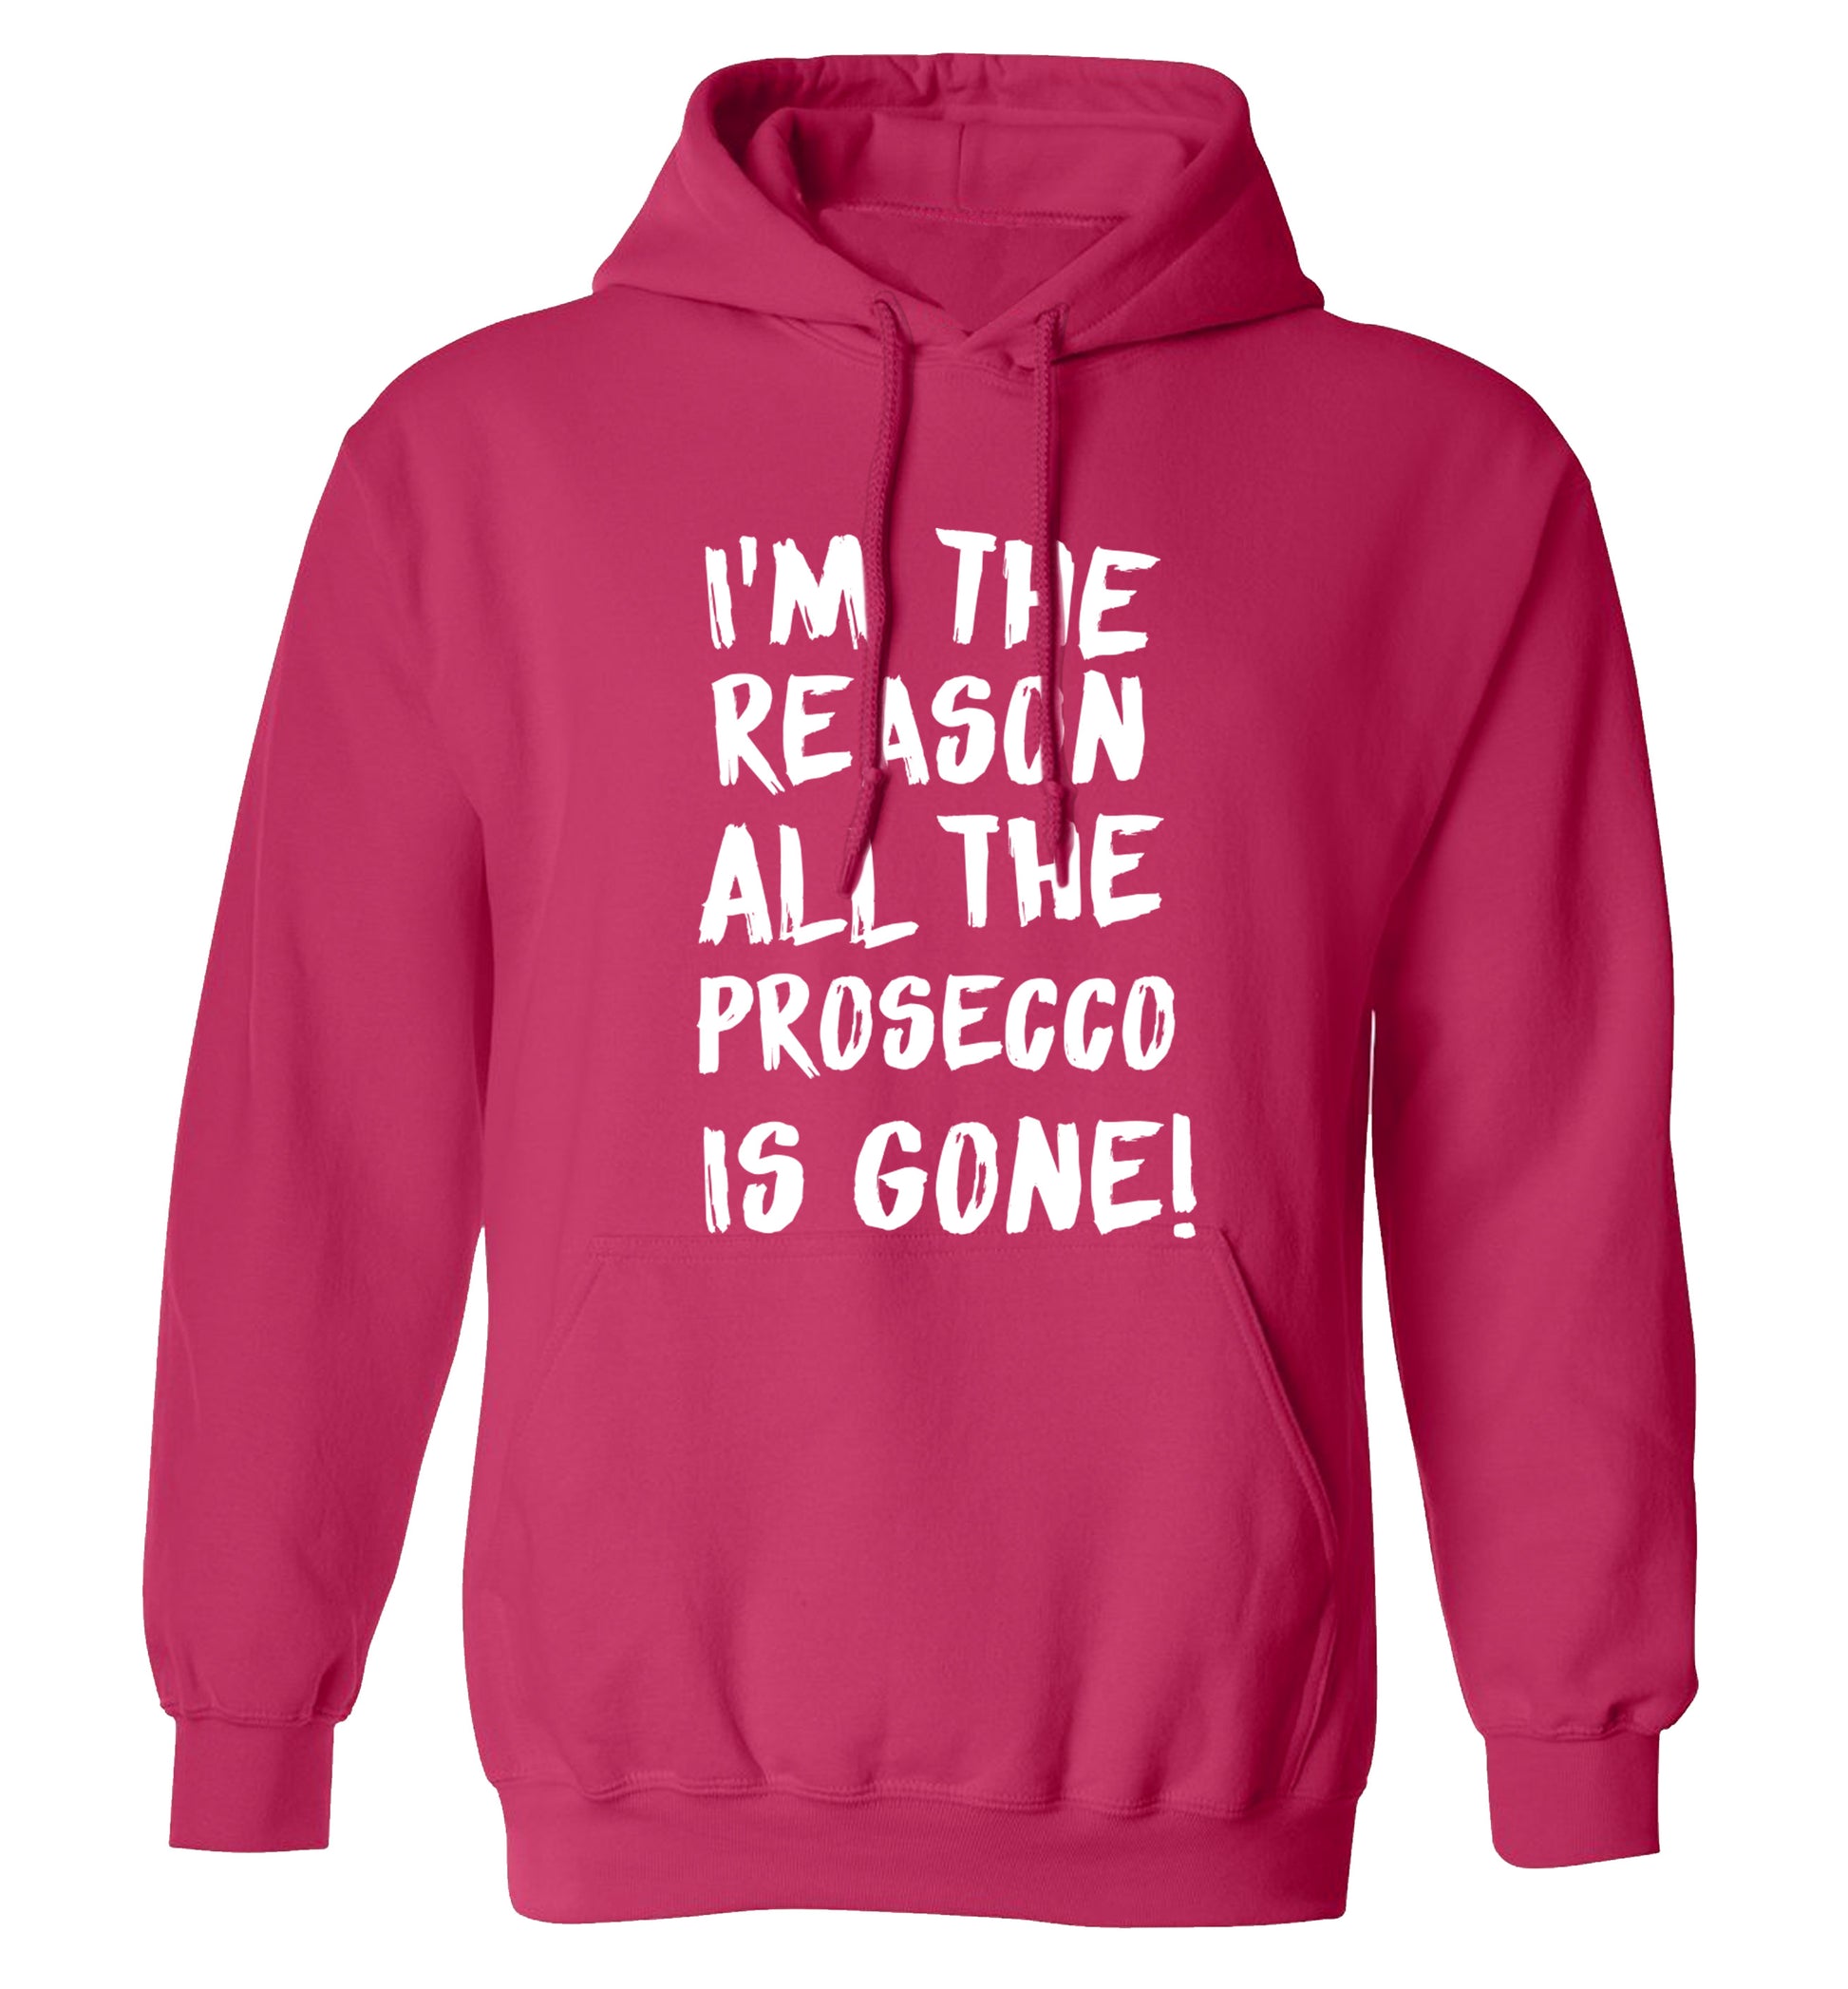 I'm the reason all the prosecco is gone adults unisex pink hoodie 2XL